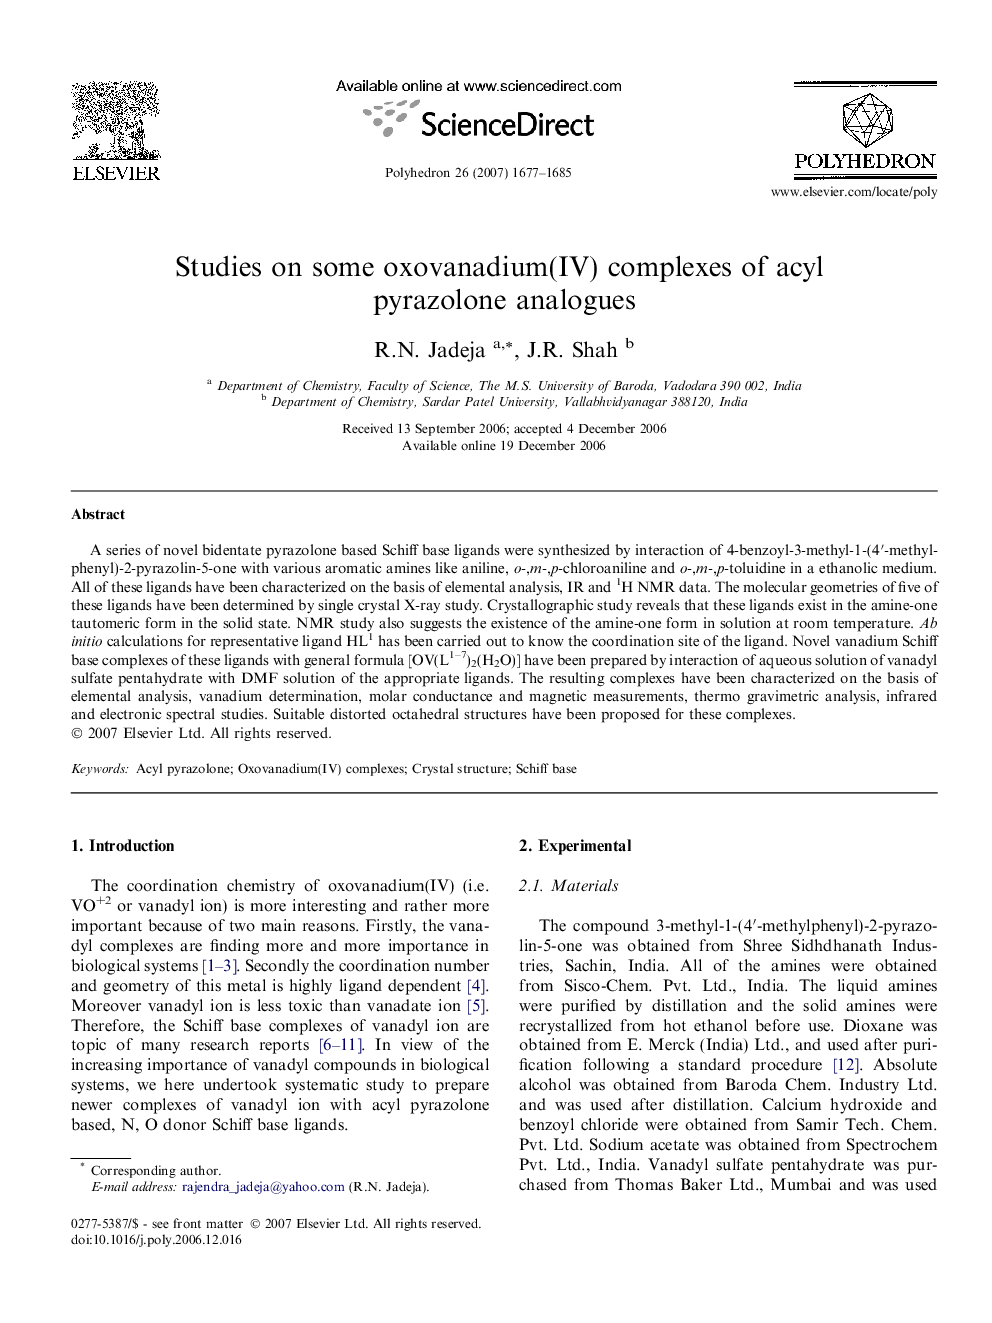 Studies on some oxovanadium(IV) complexes of acyl pyrazolone analogues